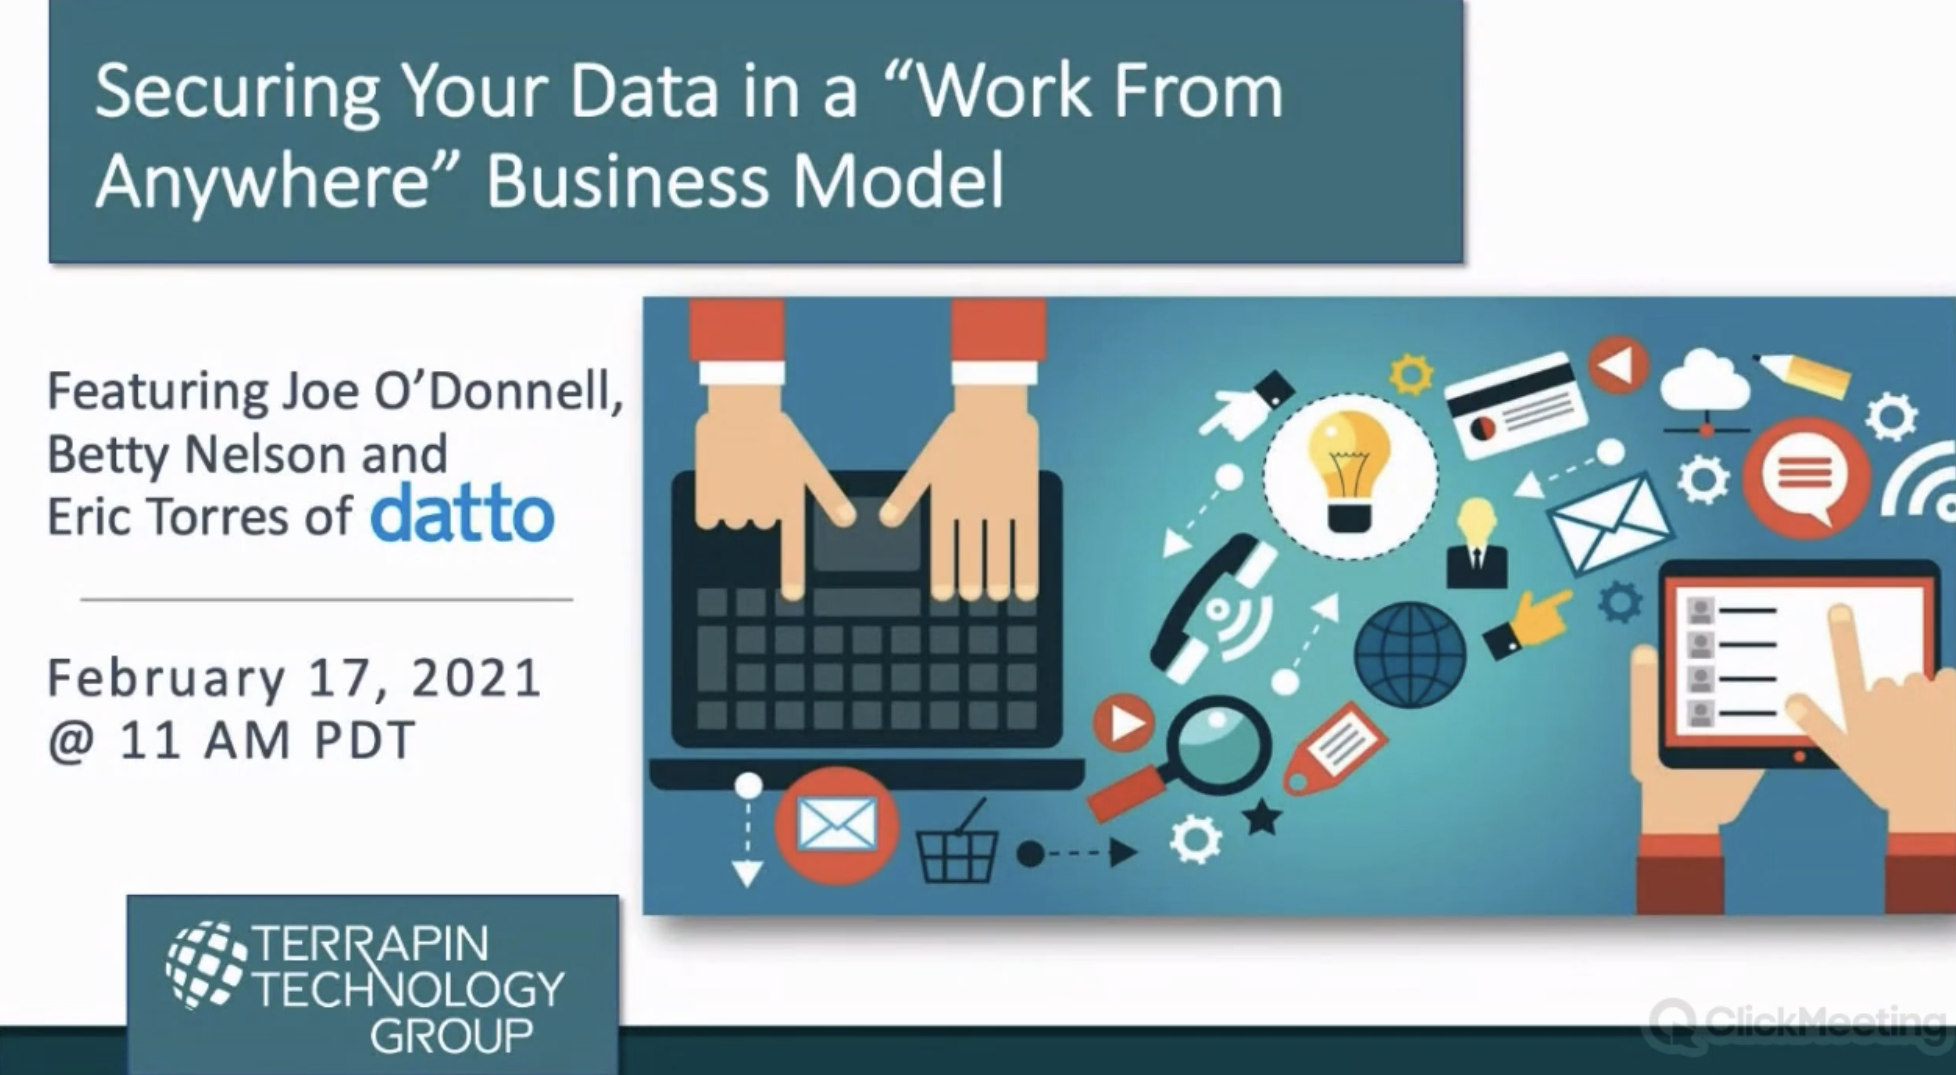 Securing Your Data in a “Work from Anywhere” Business Model